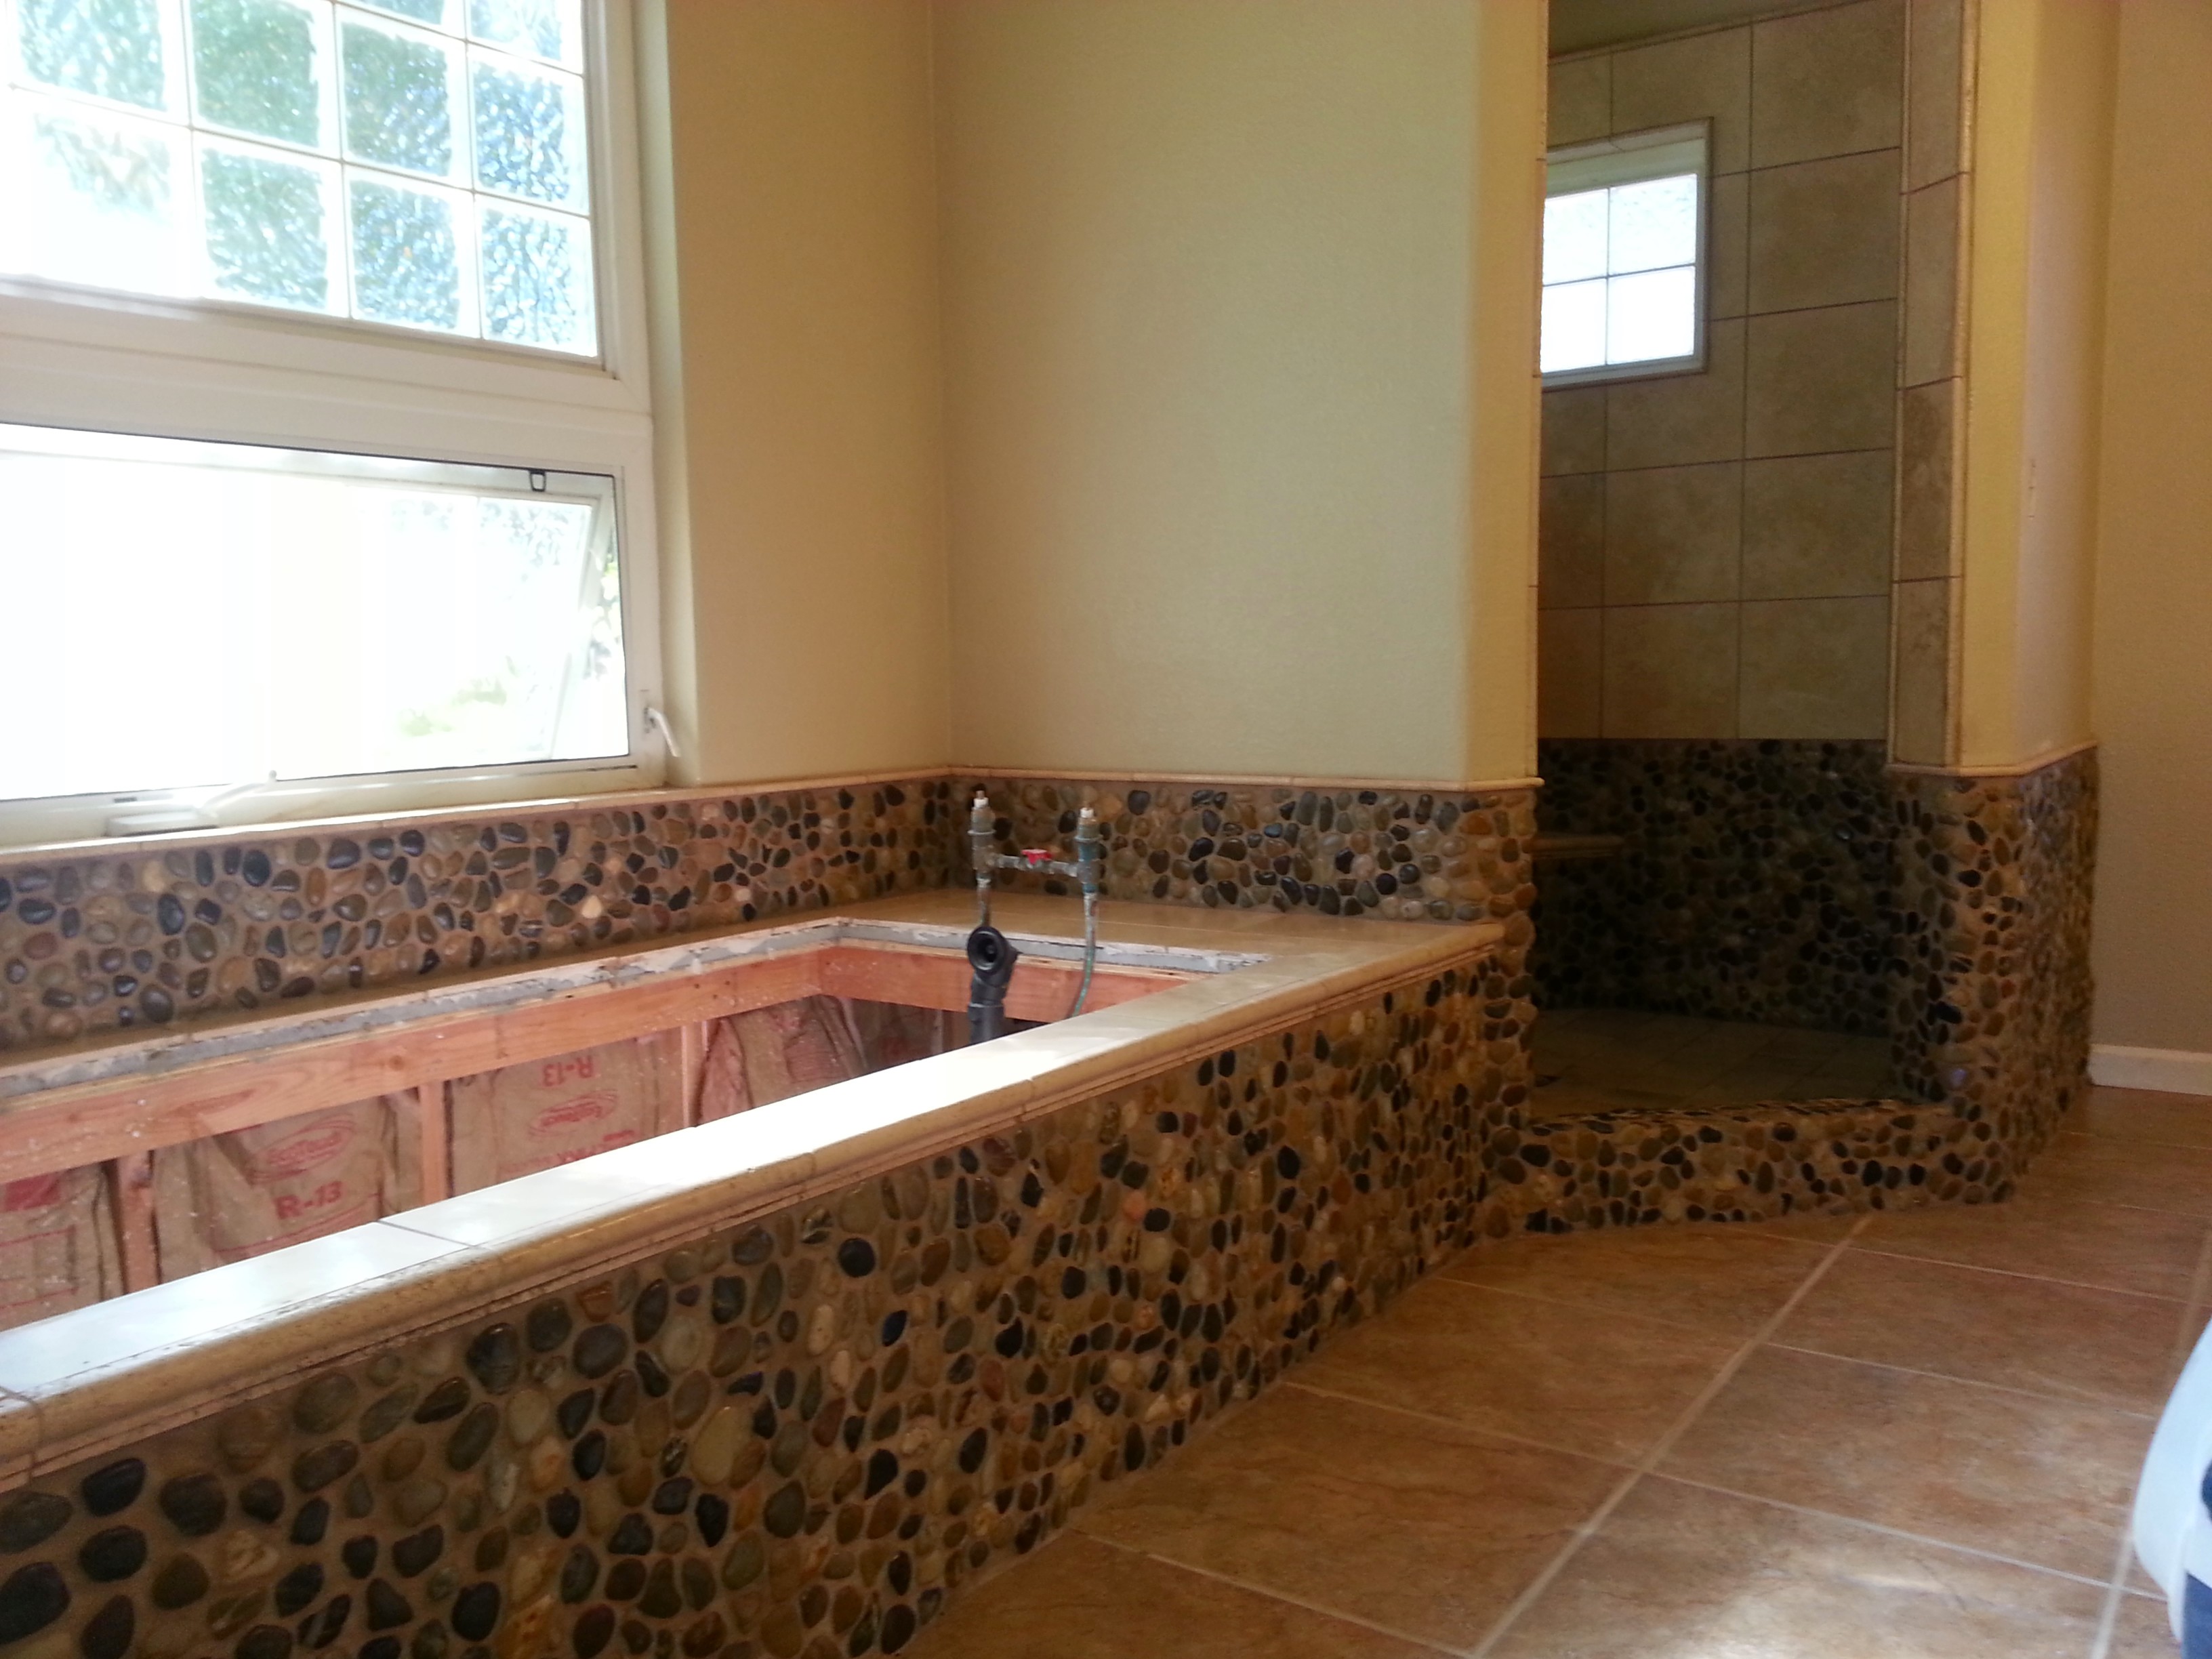 Bathroom remodeling with small tiles